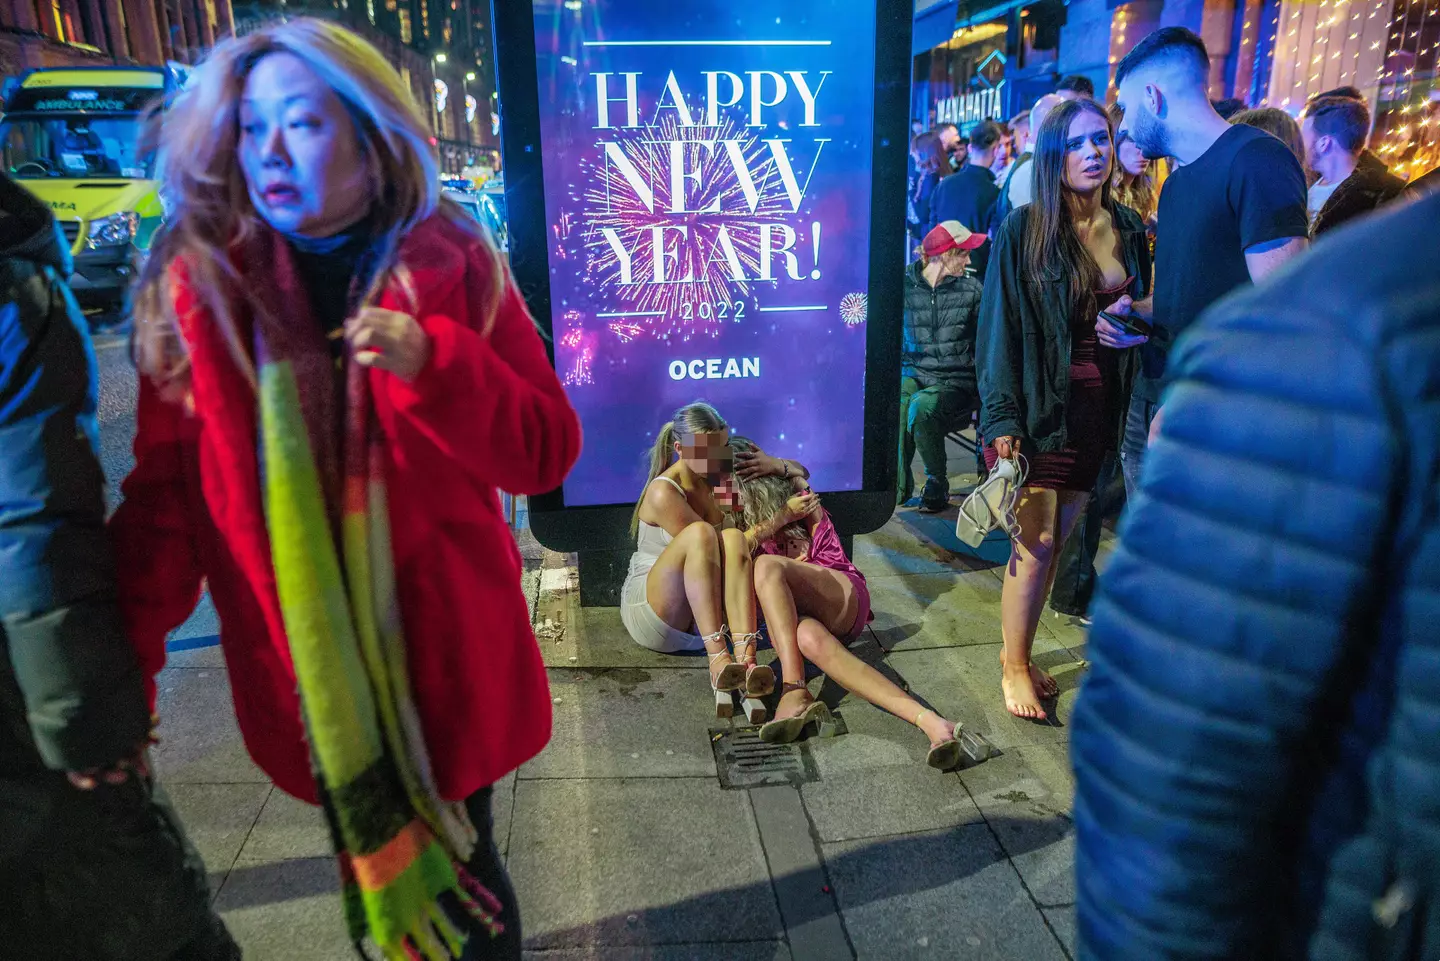 The photographer's divisive picture from last weekend's New Year celebrations.